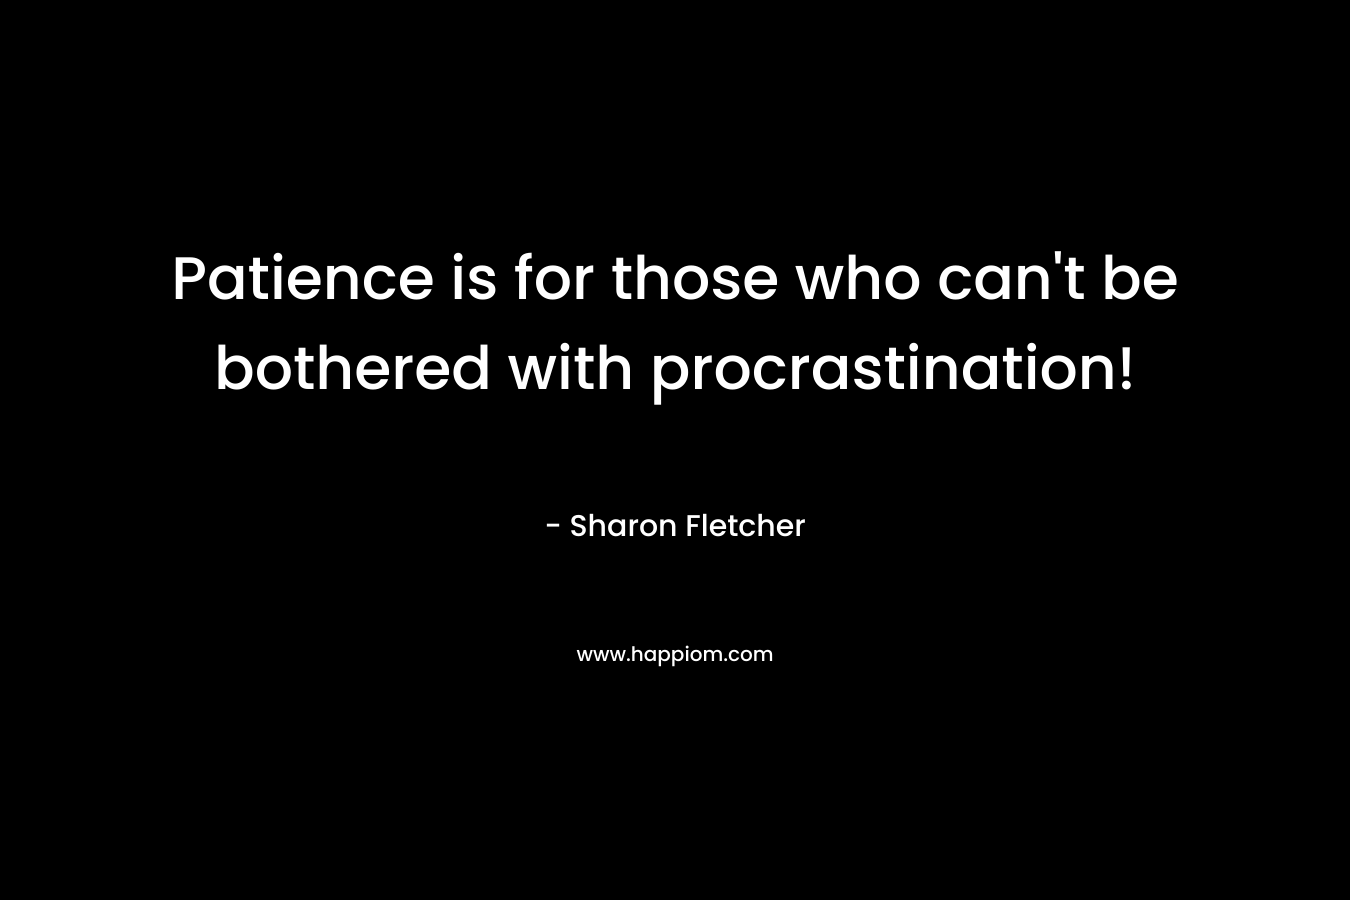 Patience is for those who can't be bothered with procrastination!